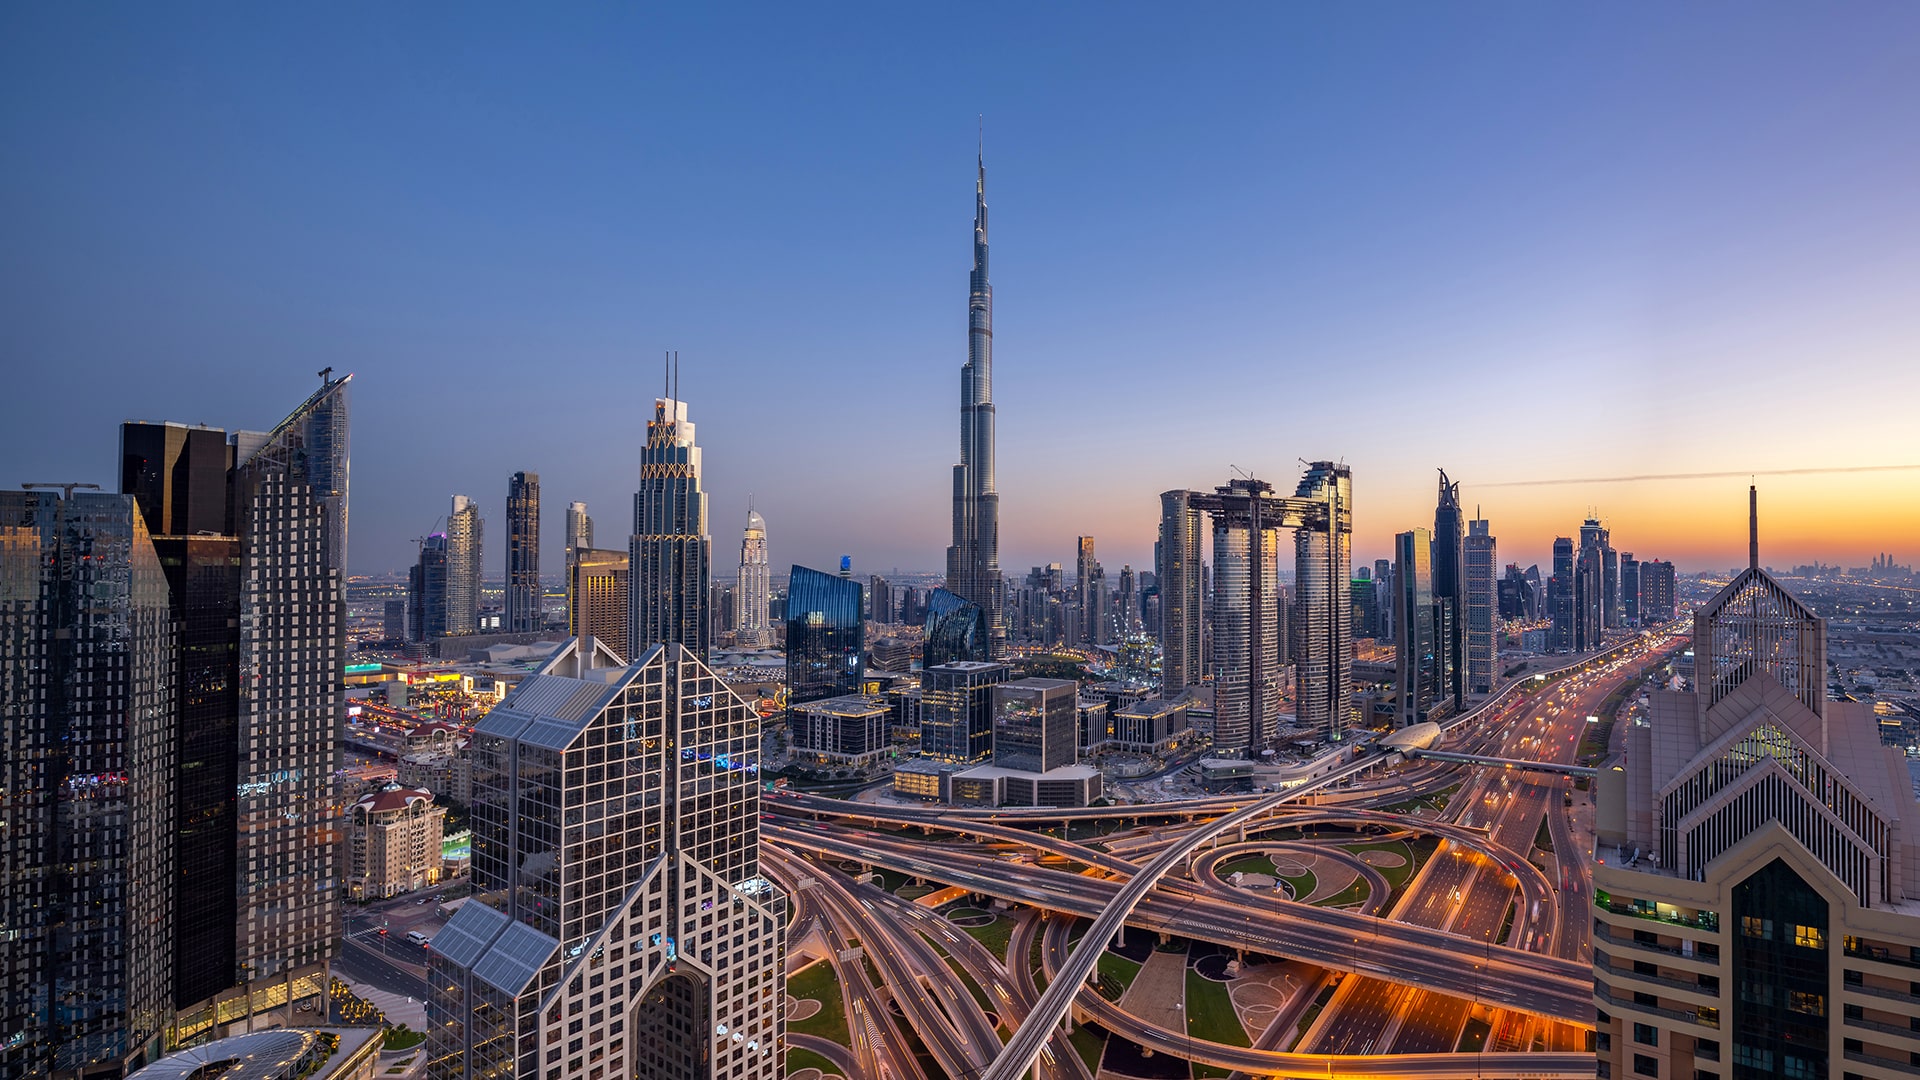 What Is a free zone in Dubai? IFZA answers